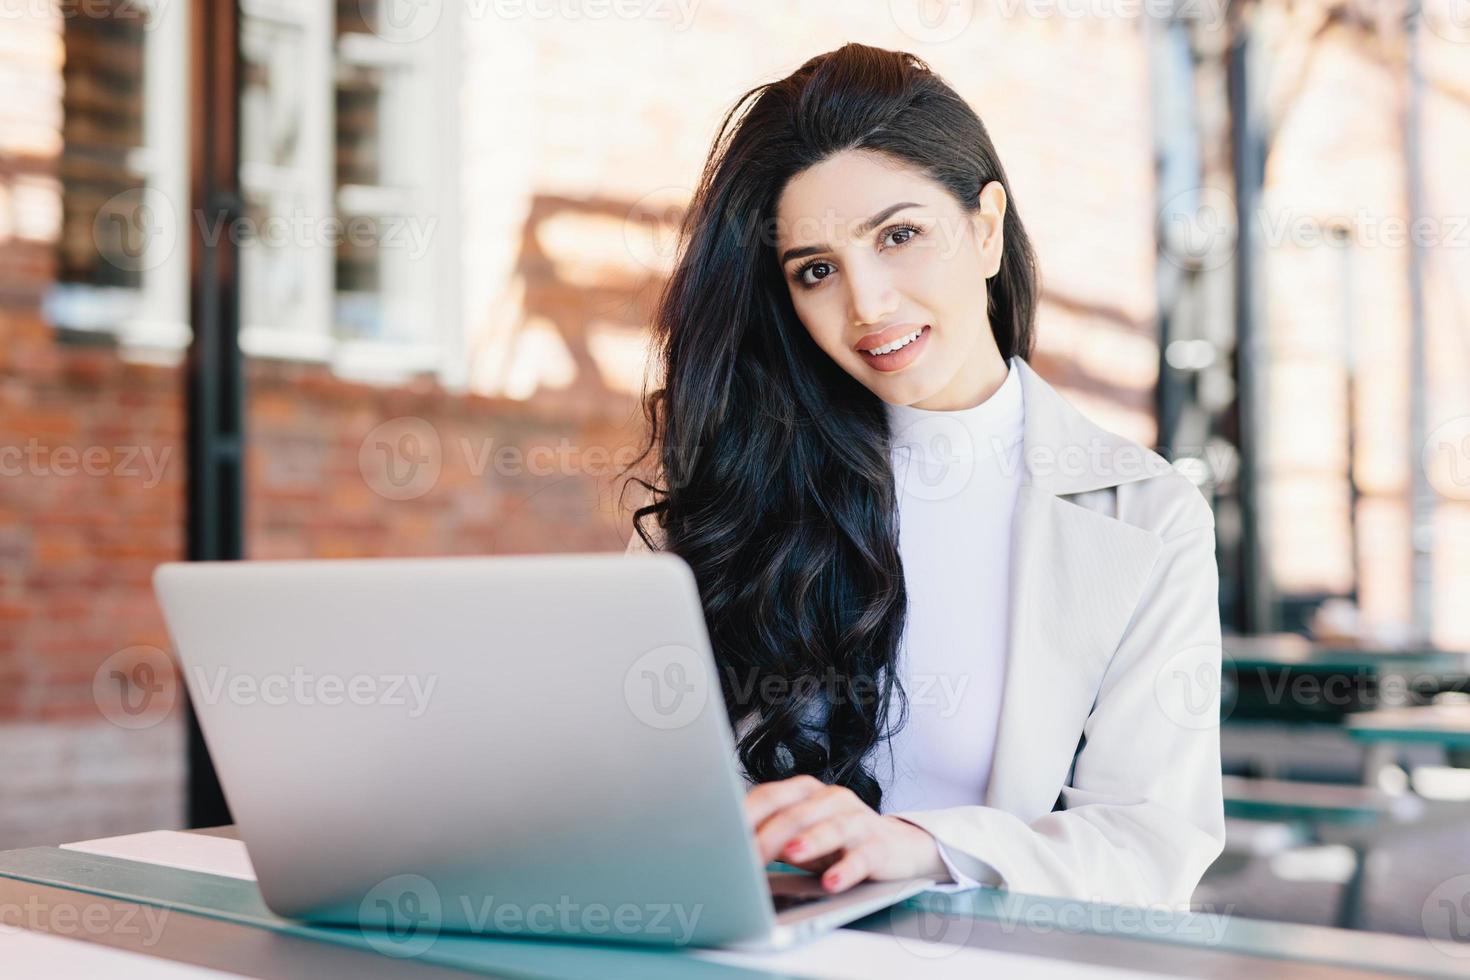 Technology and communication concept. Successful European businesswoman with beautiful appearance working at a cafe on laptop computer having smiling expression looking in camera while sitting outdoor photo